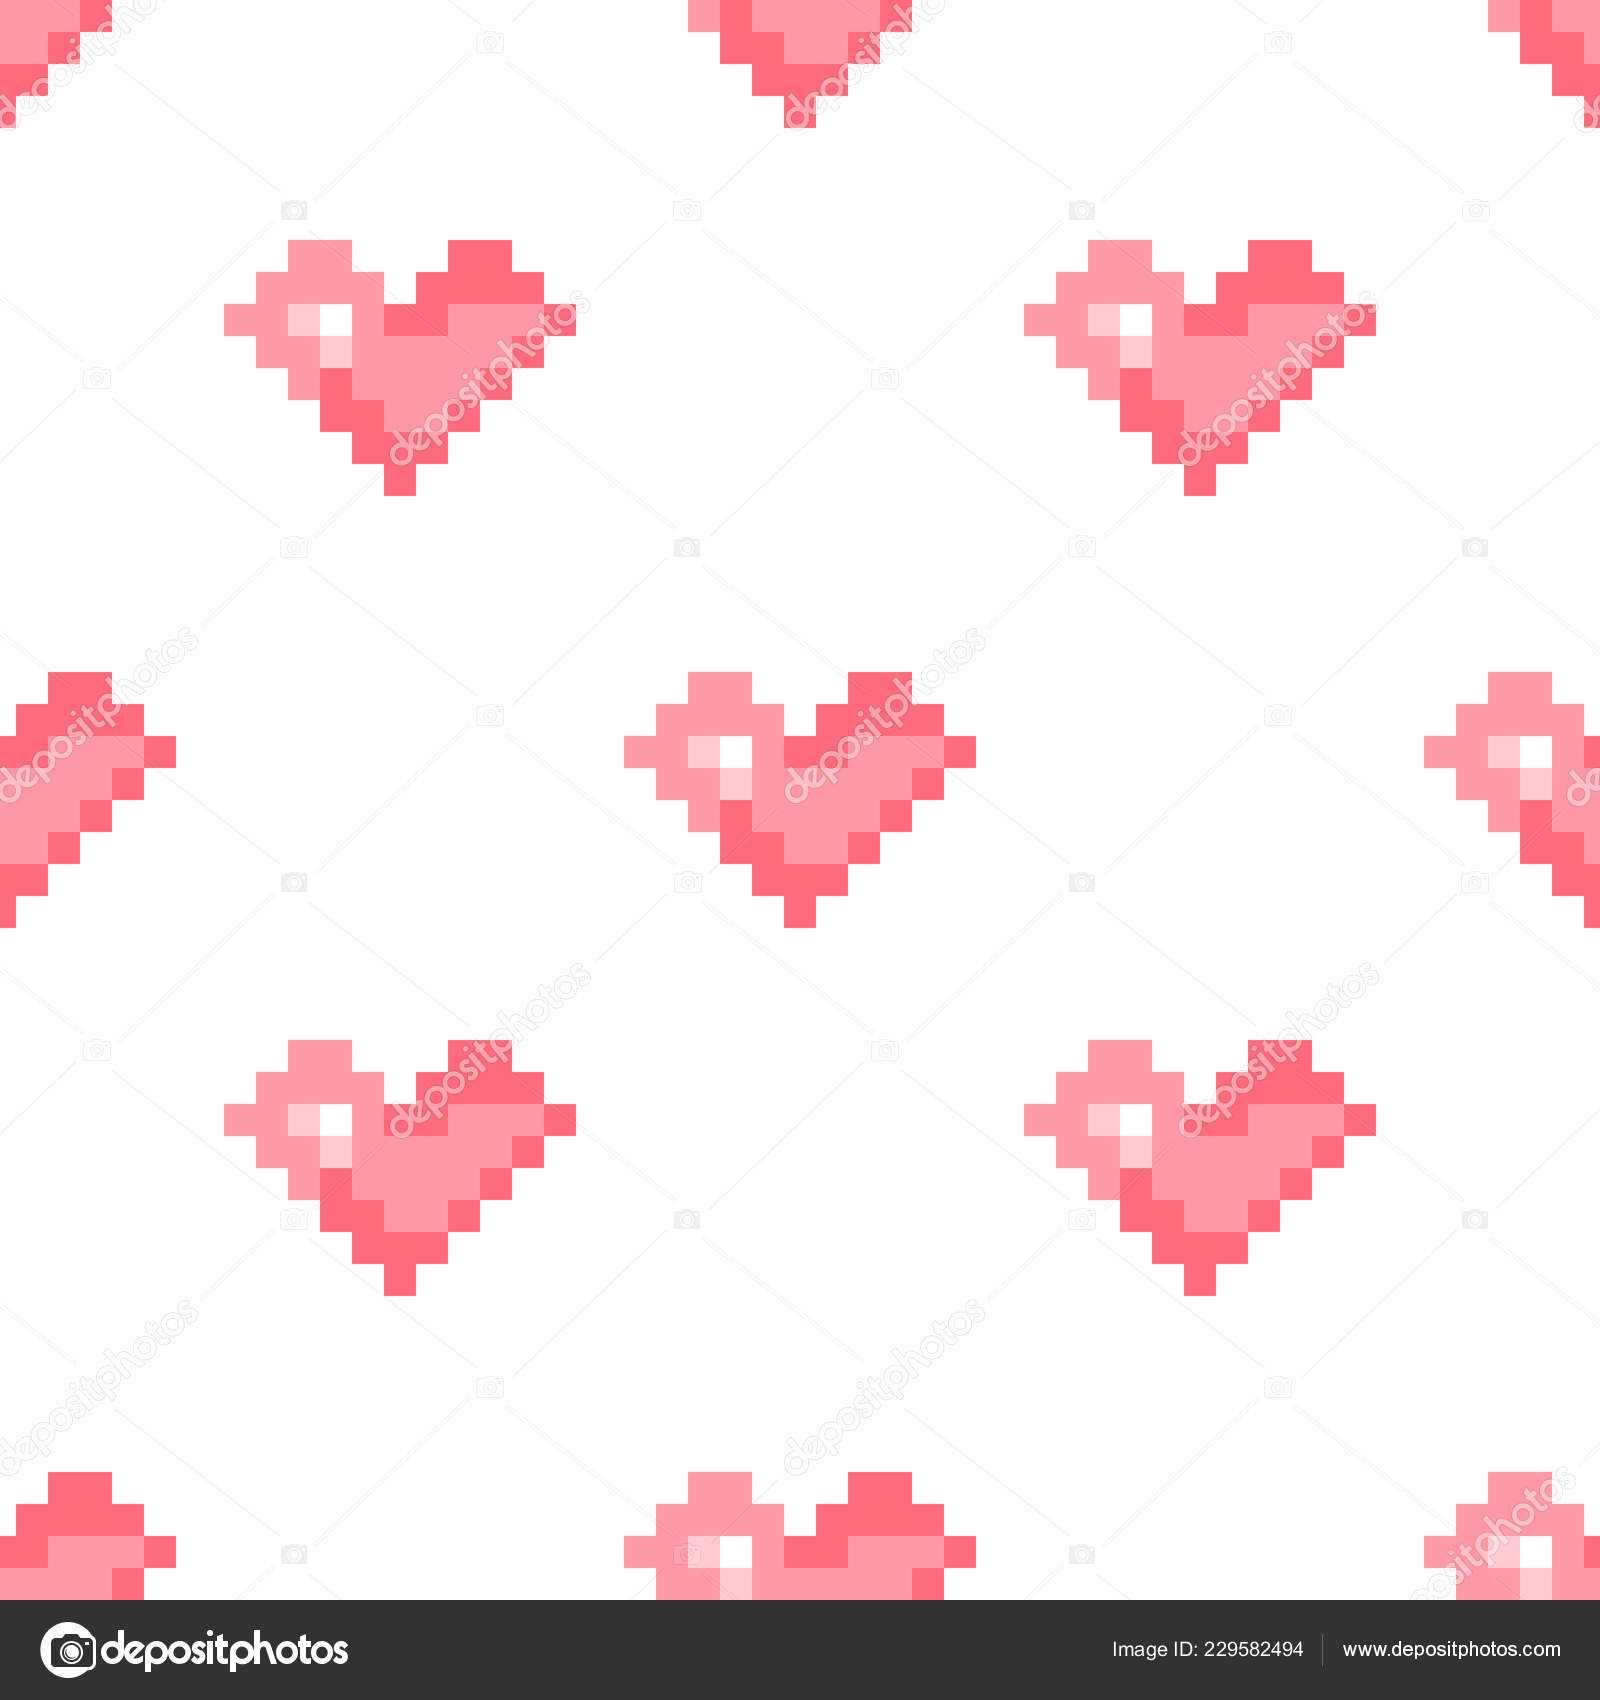 Geek Valentine Day Pixel Hearts Seamless Pattern Background Within Pixel Heart Pop Up Card Template